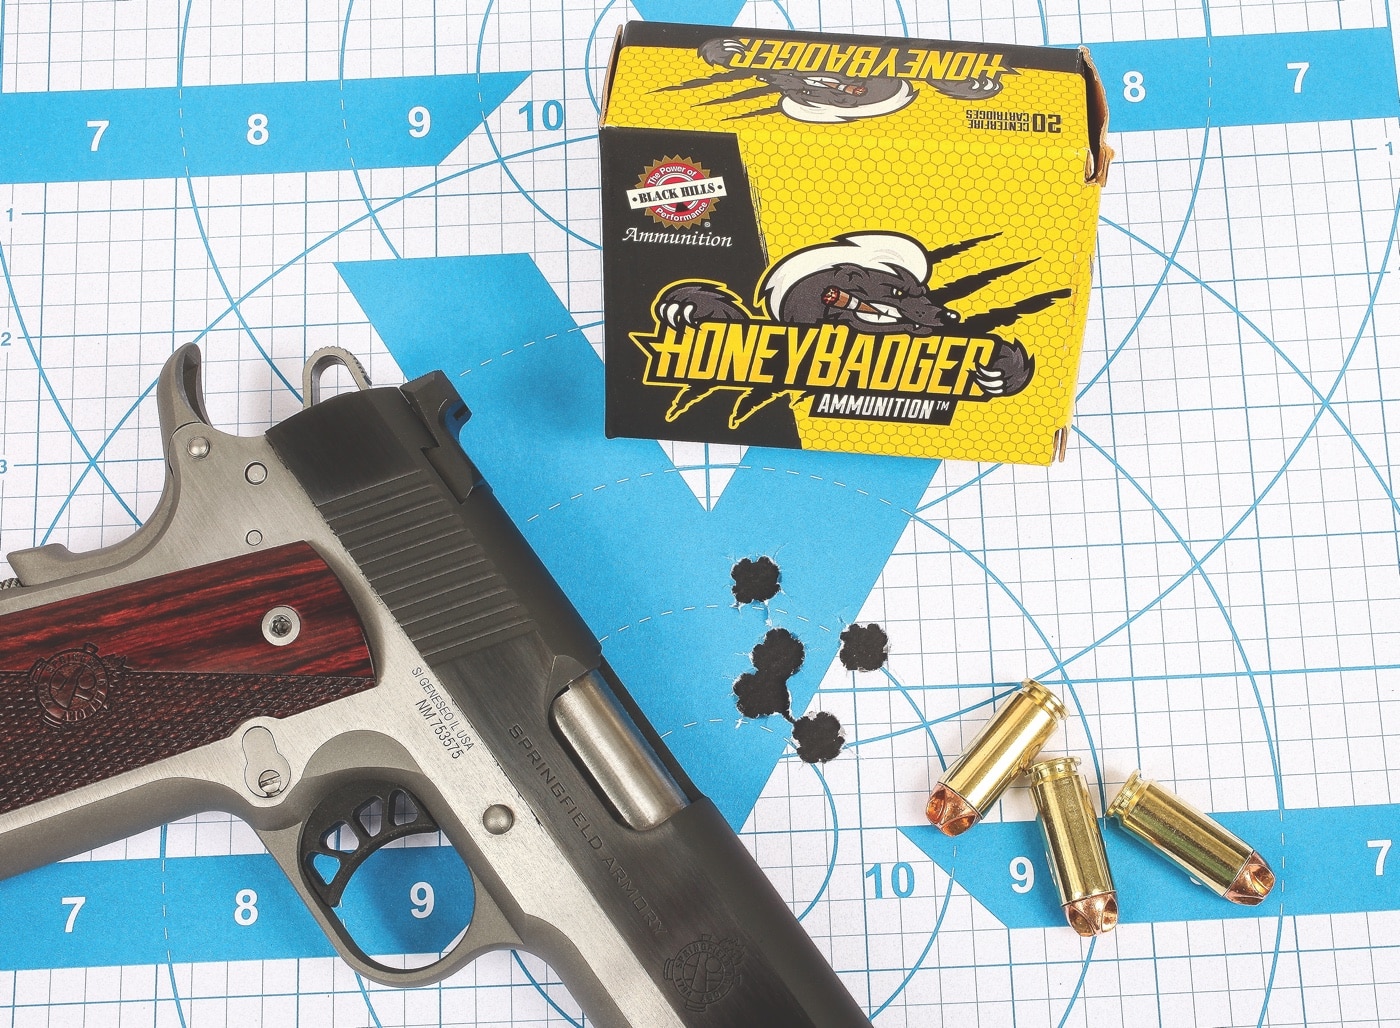 springfield ronin test black hills honeybadger ammo accuracy test performance